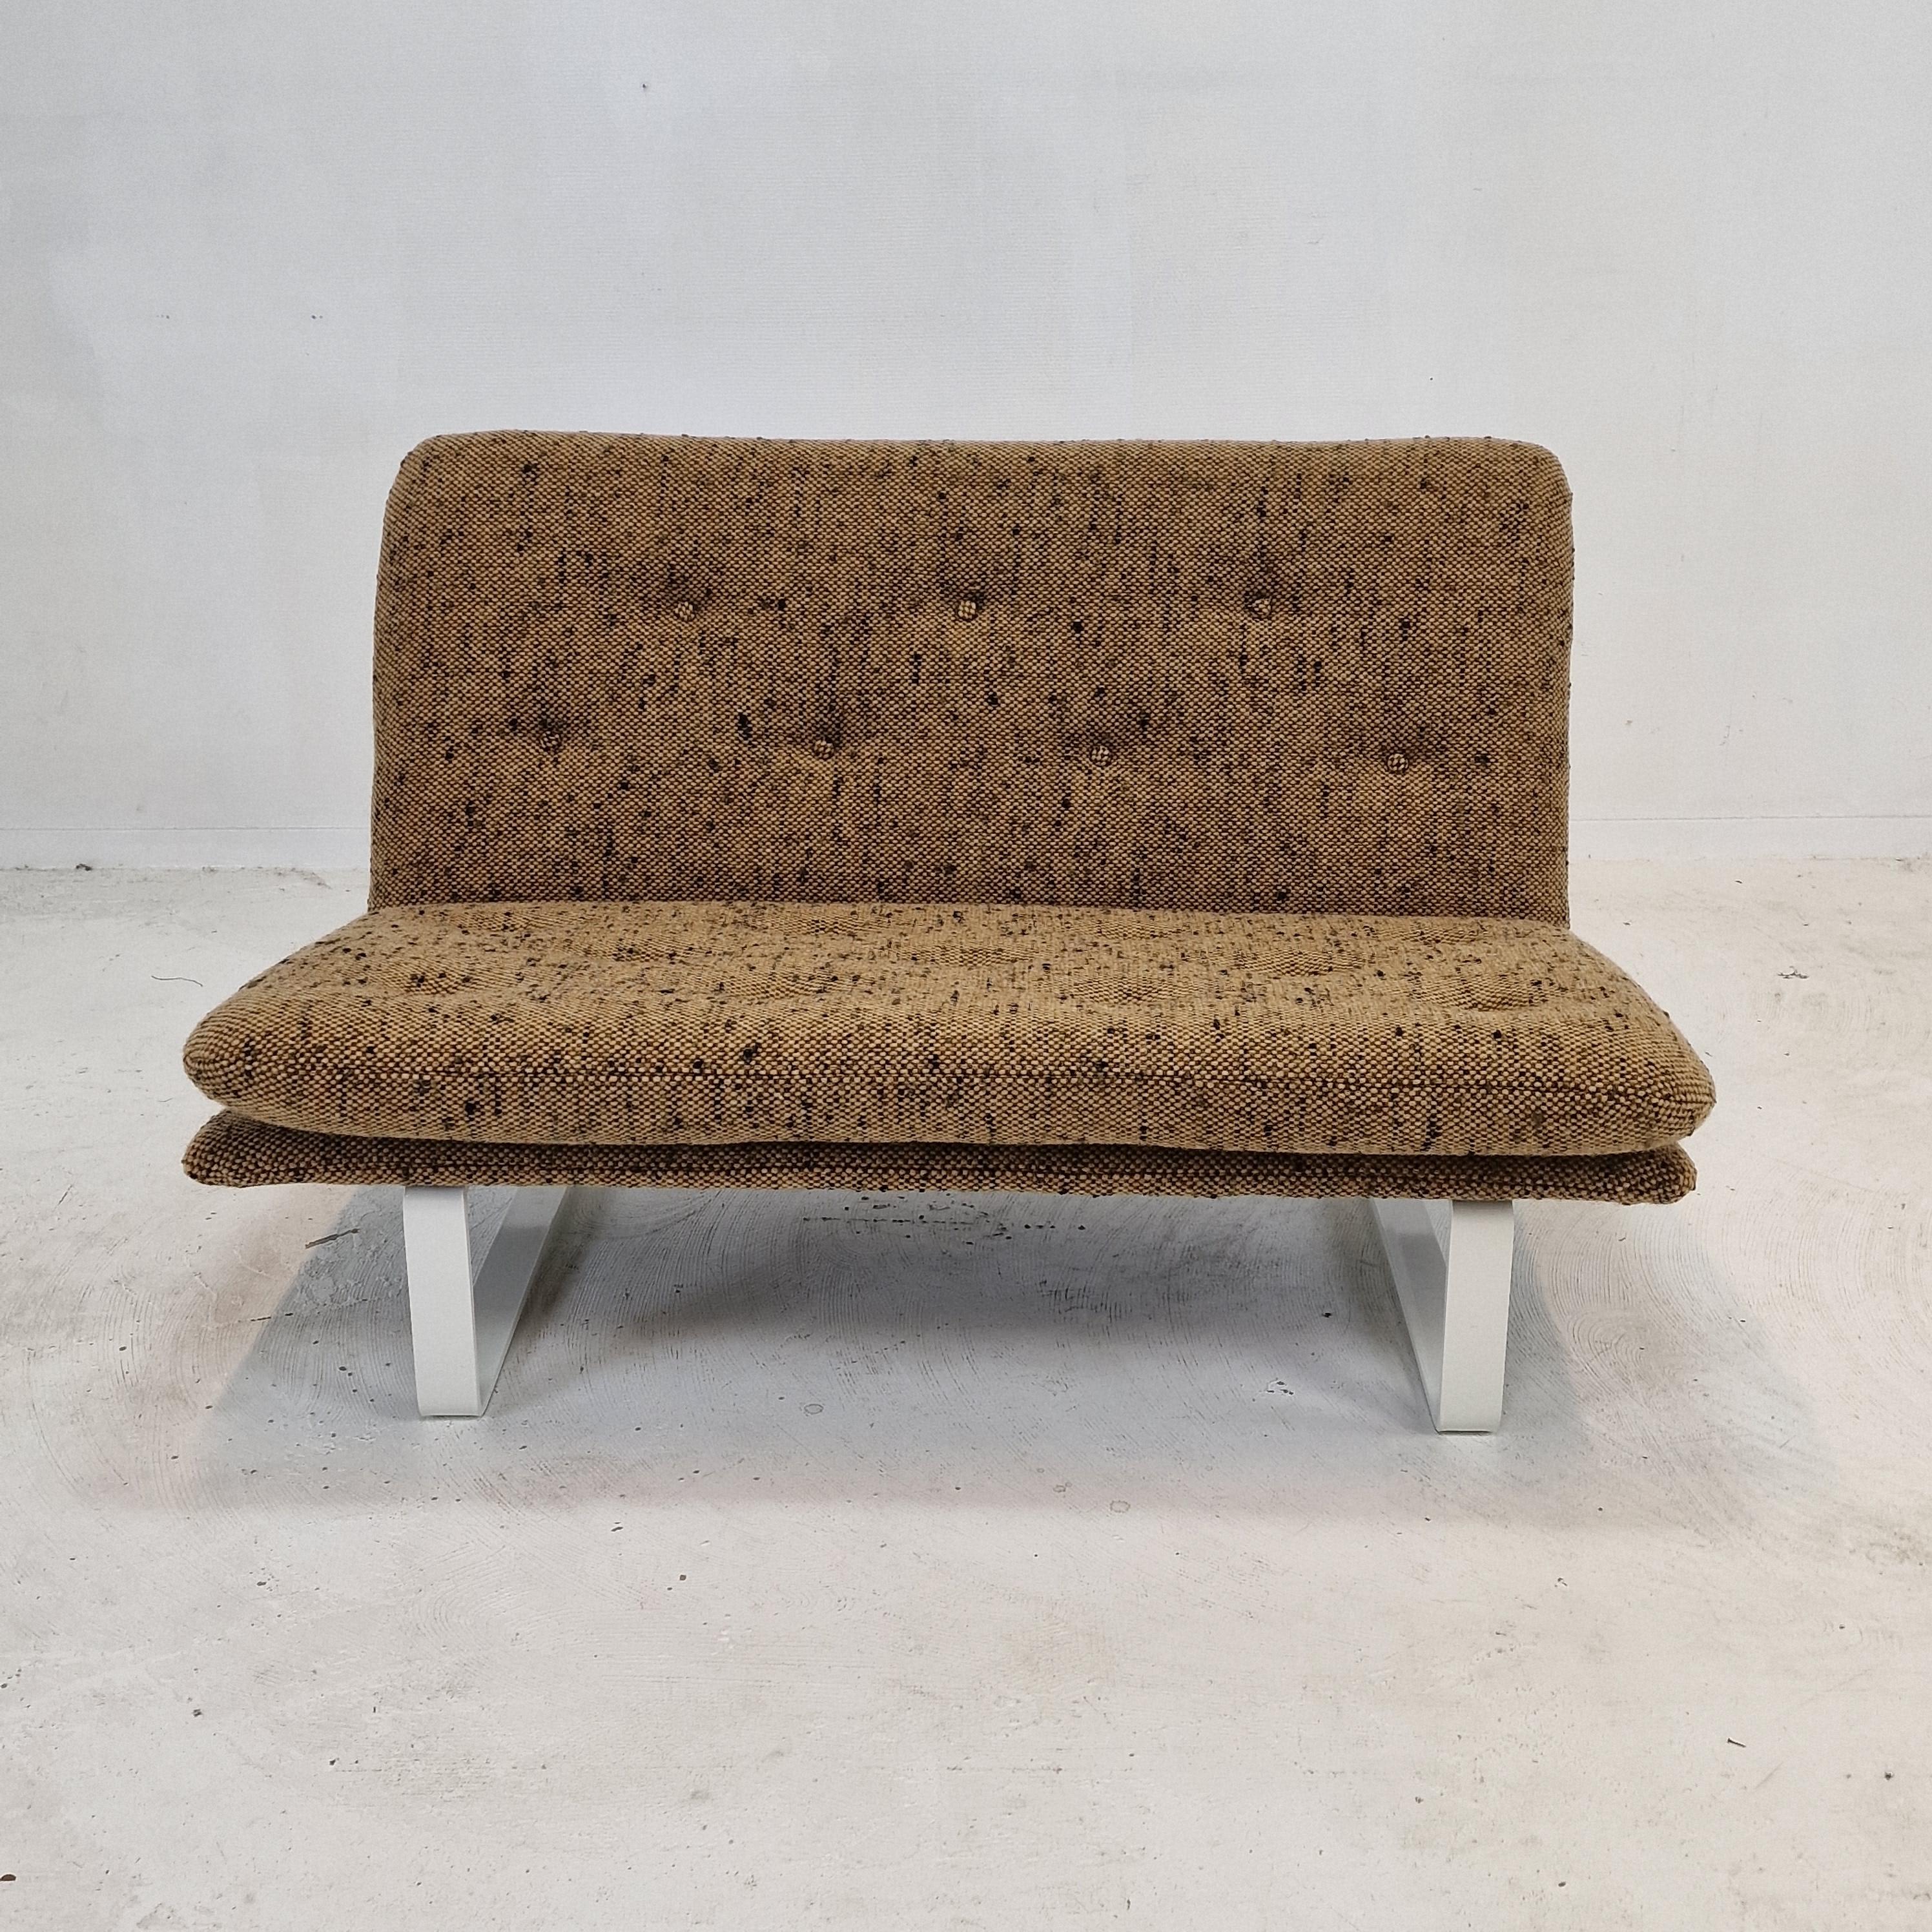 Stunning and comfortabele 2 seat sofa designed by Kho Liang Ie. 
Manufactured by Artifort in the 1960s. 

Very solid and high quality, made with the best materials.

The sofa has just been reupholstered with fantastic original wool fabric from